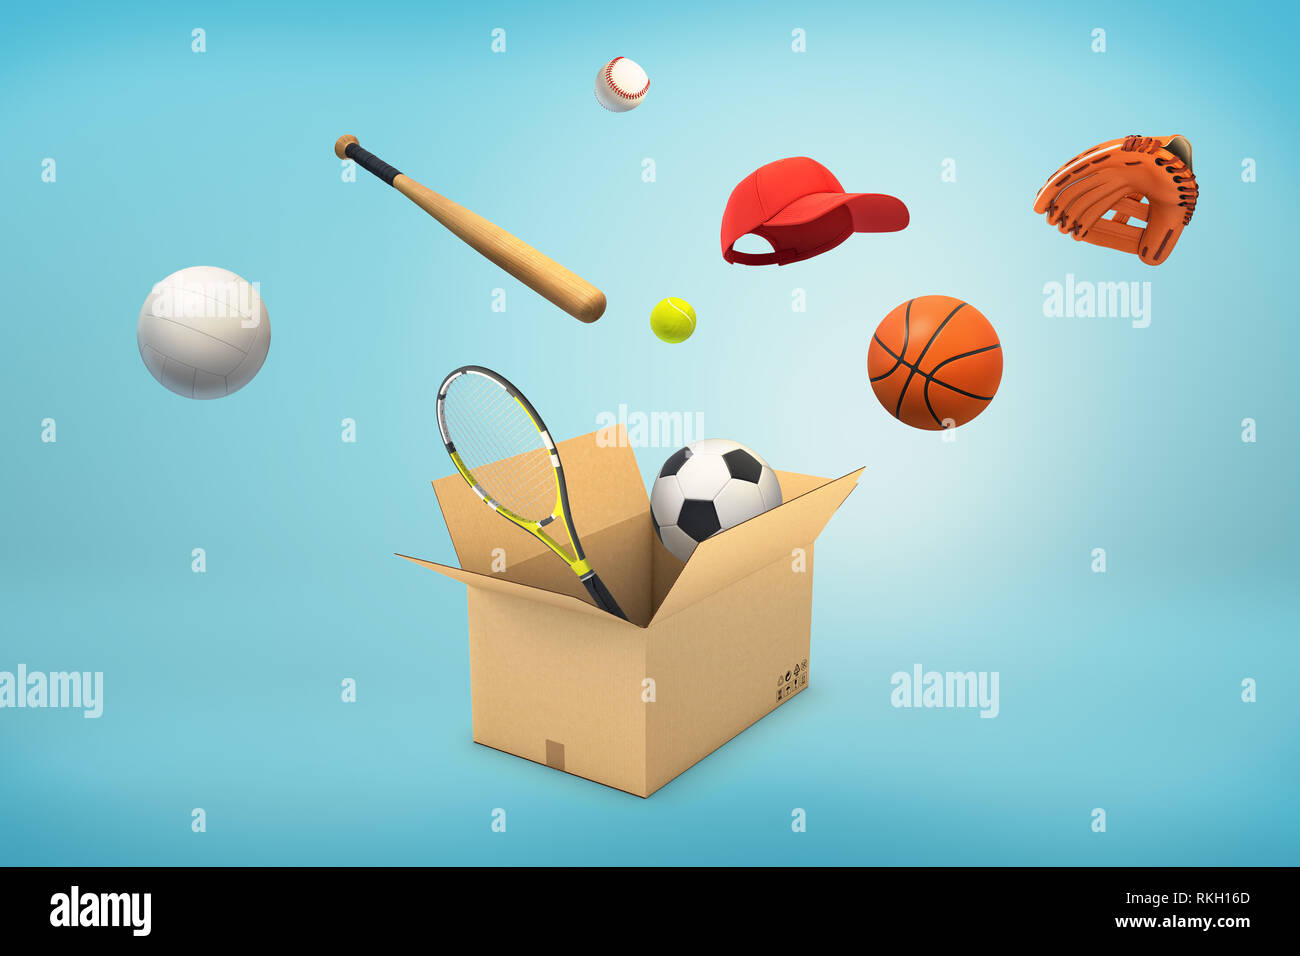 3d rendering of a carton box with different sport balls, bats and caps flying in or out of it. Stock Photo